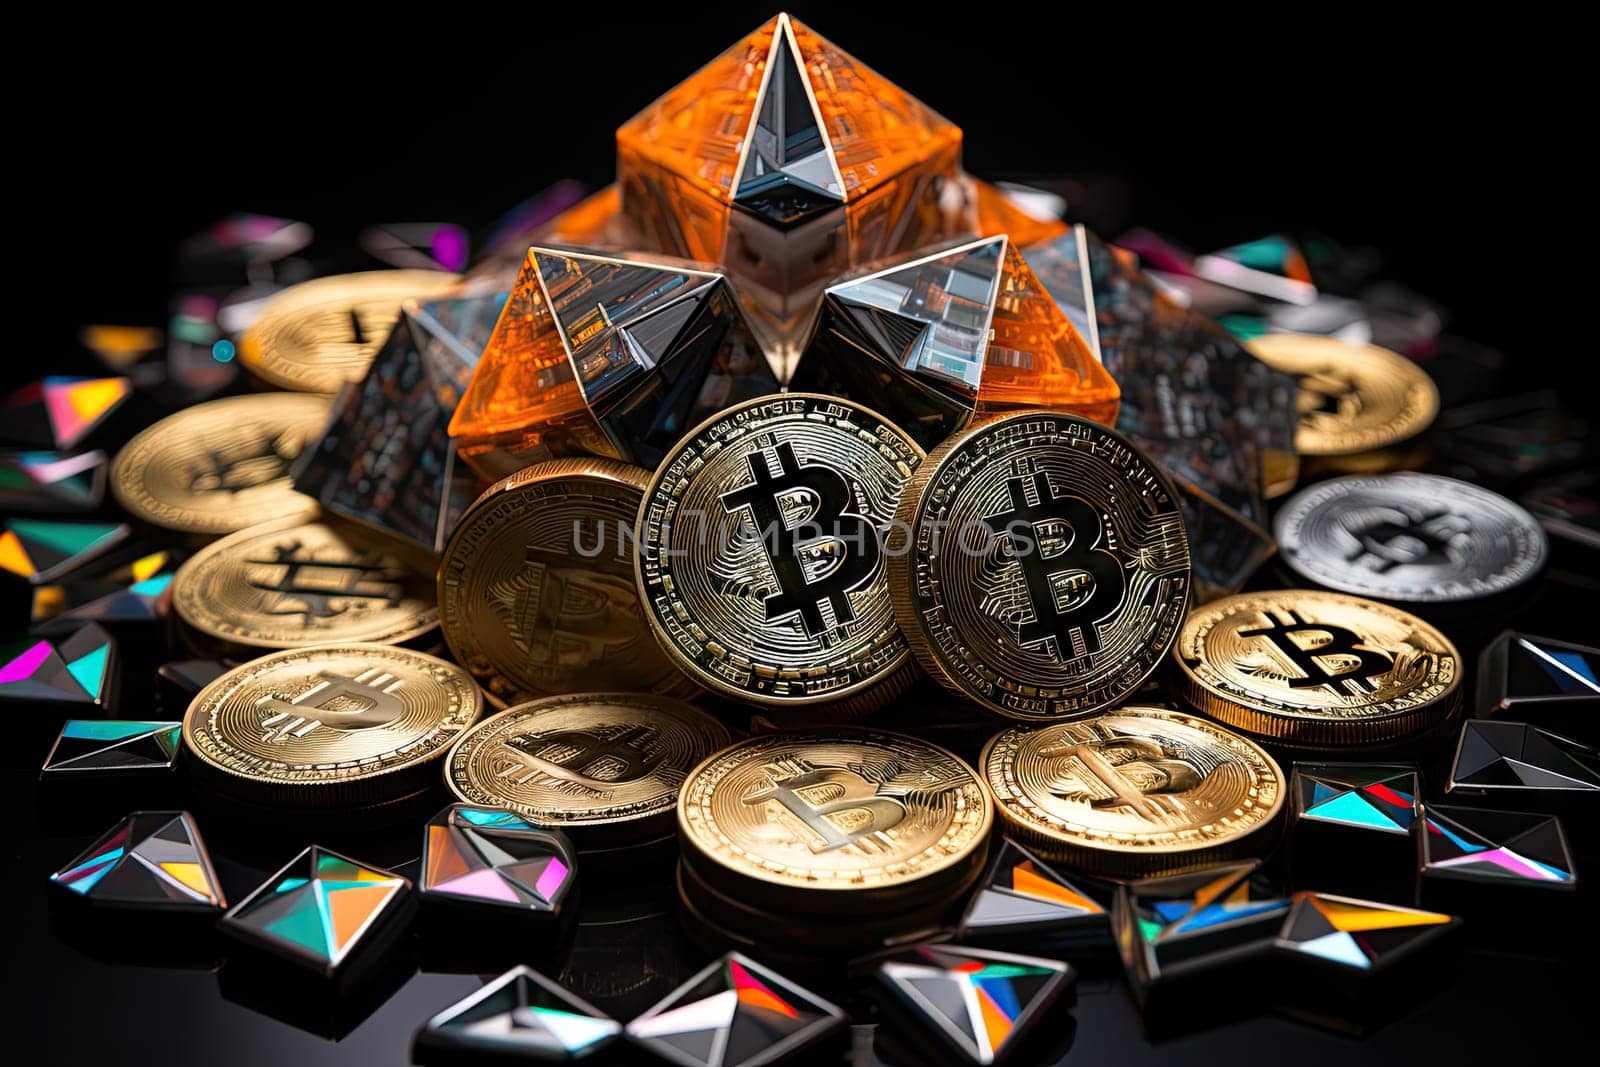 A Tower of Bitcoins: The Digital Currency Stacked High